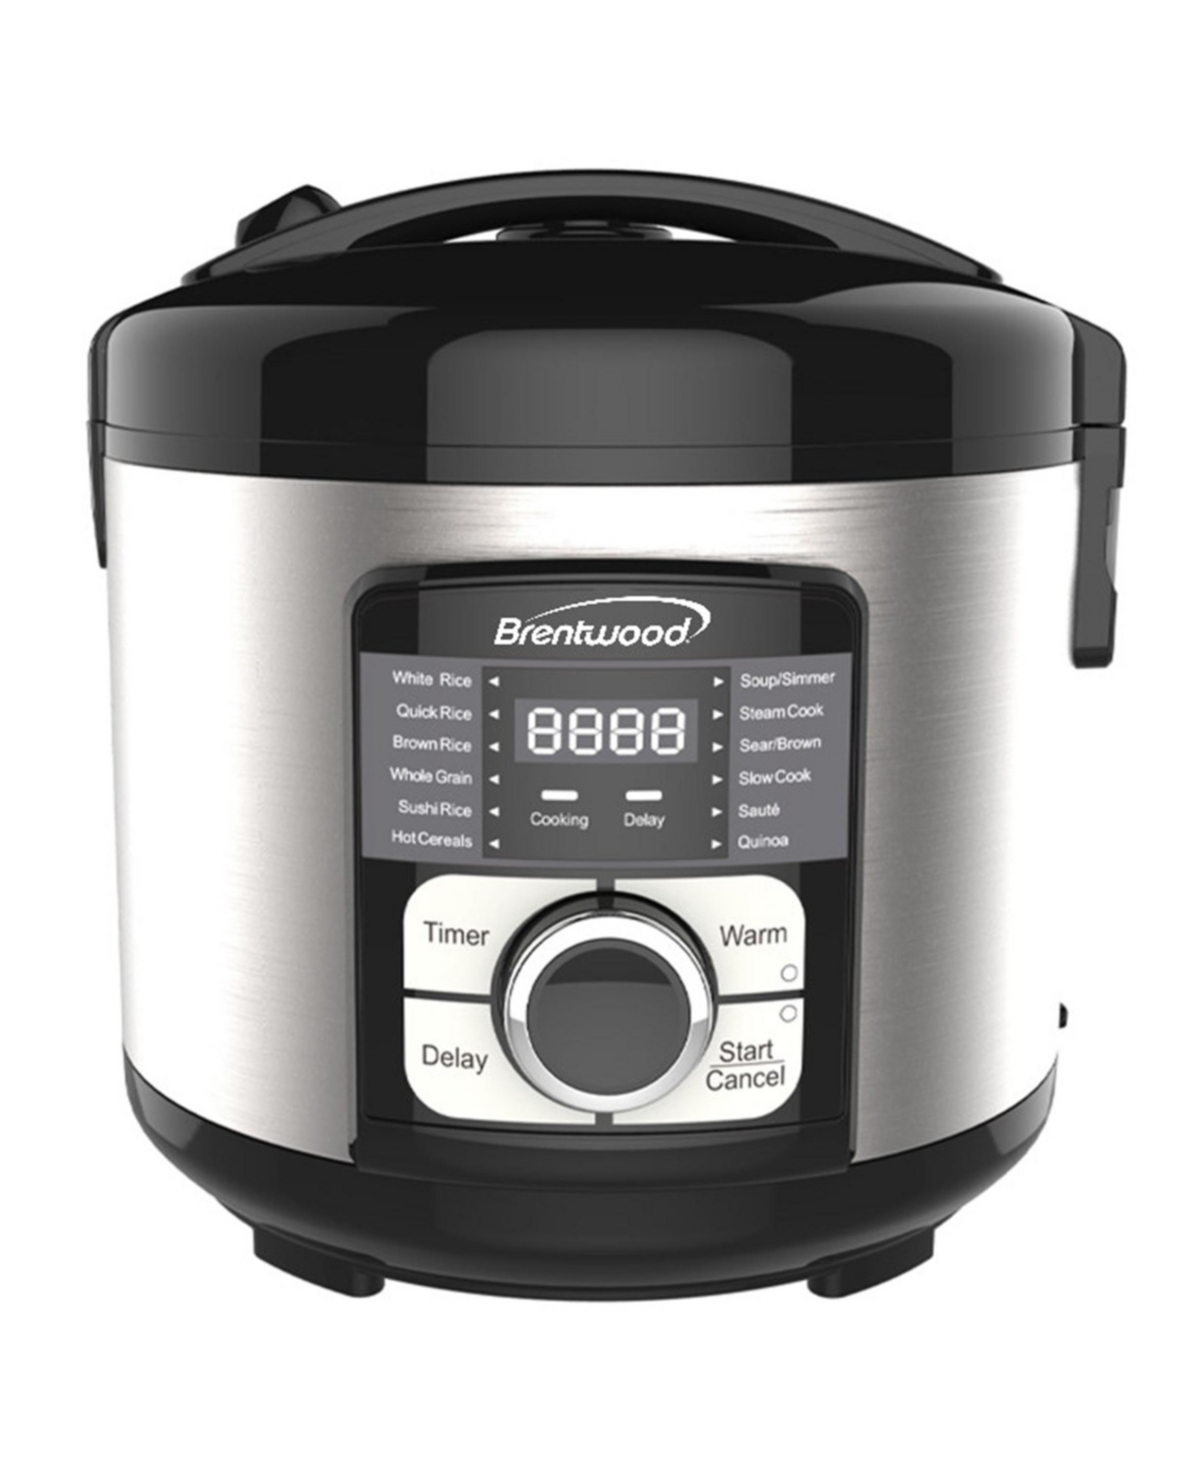 Brentwood Select 12 Function Stainless Steel Multi-Cooker in Black - Silver